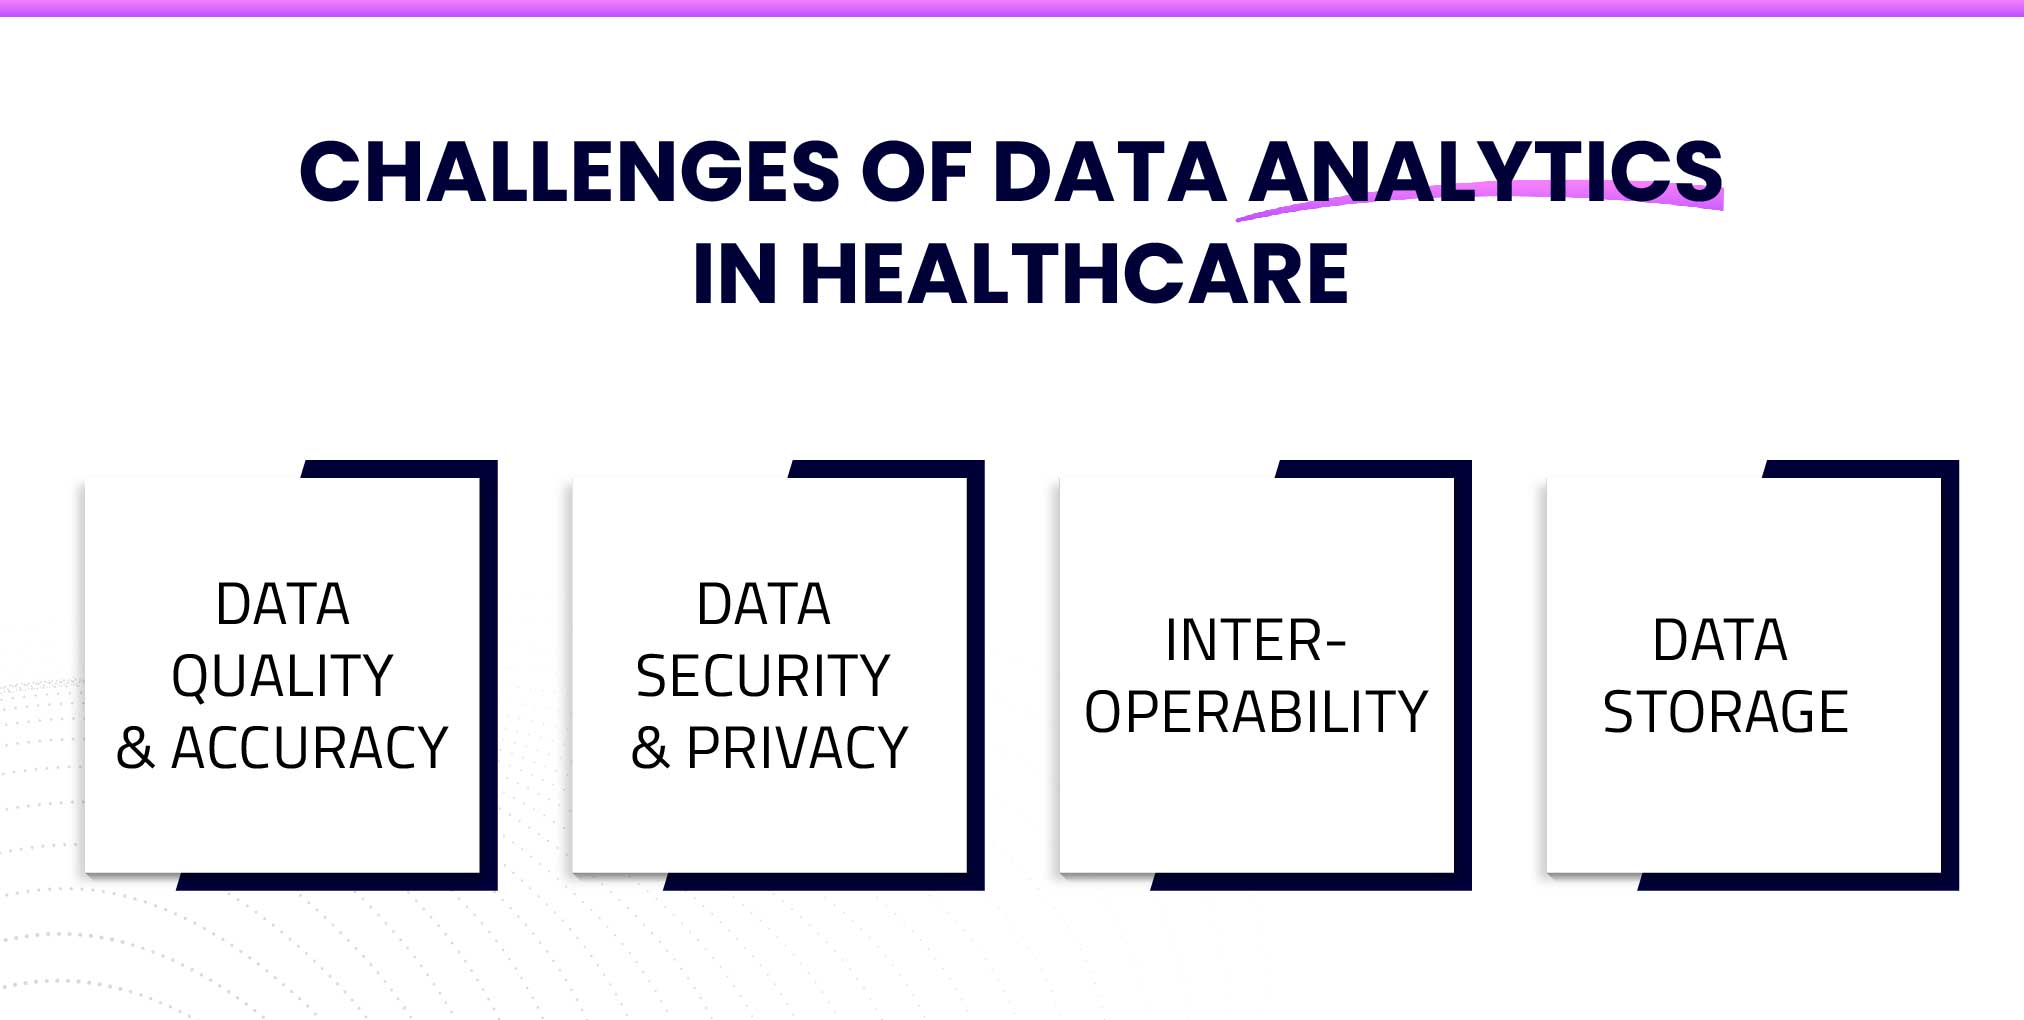 Challenges of Data Analytics in Healthcare